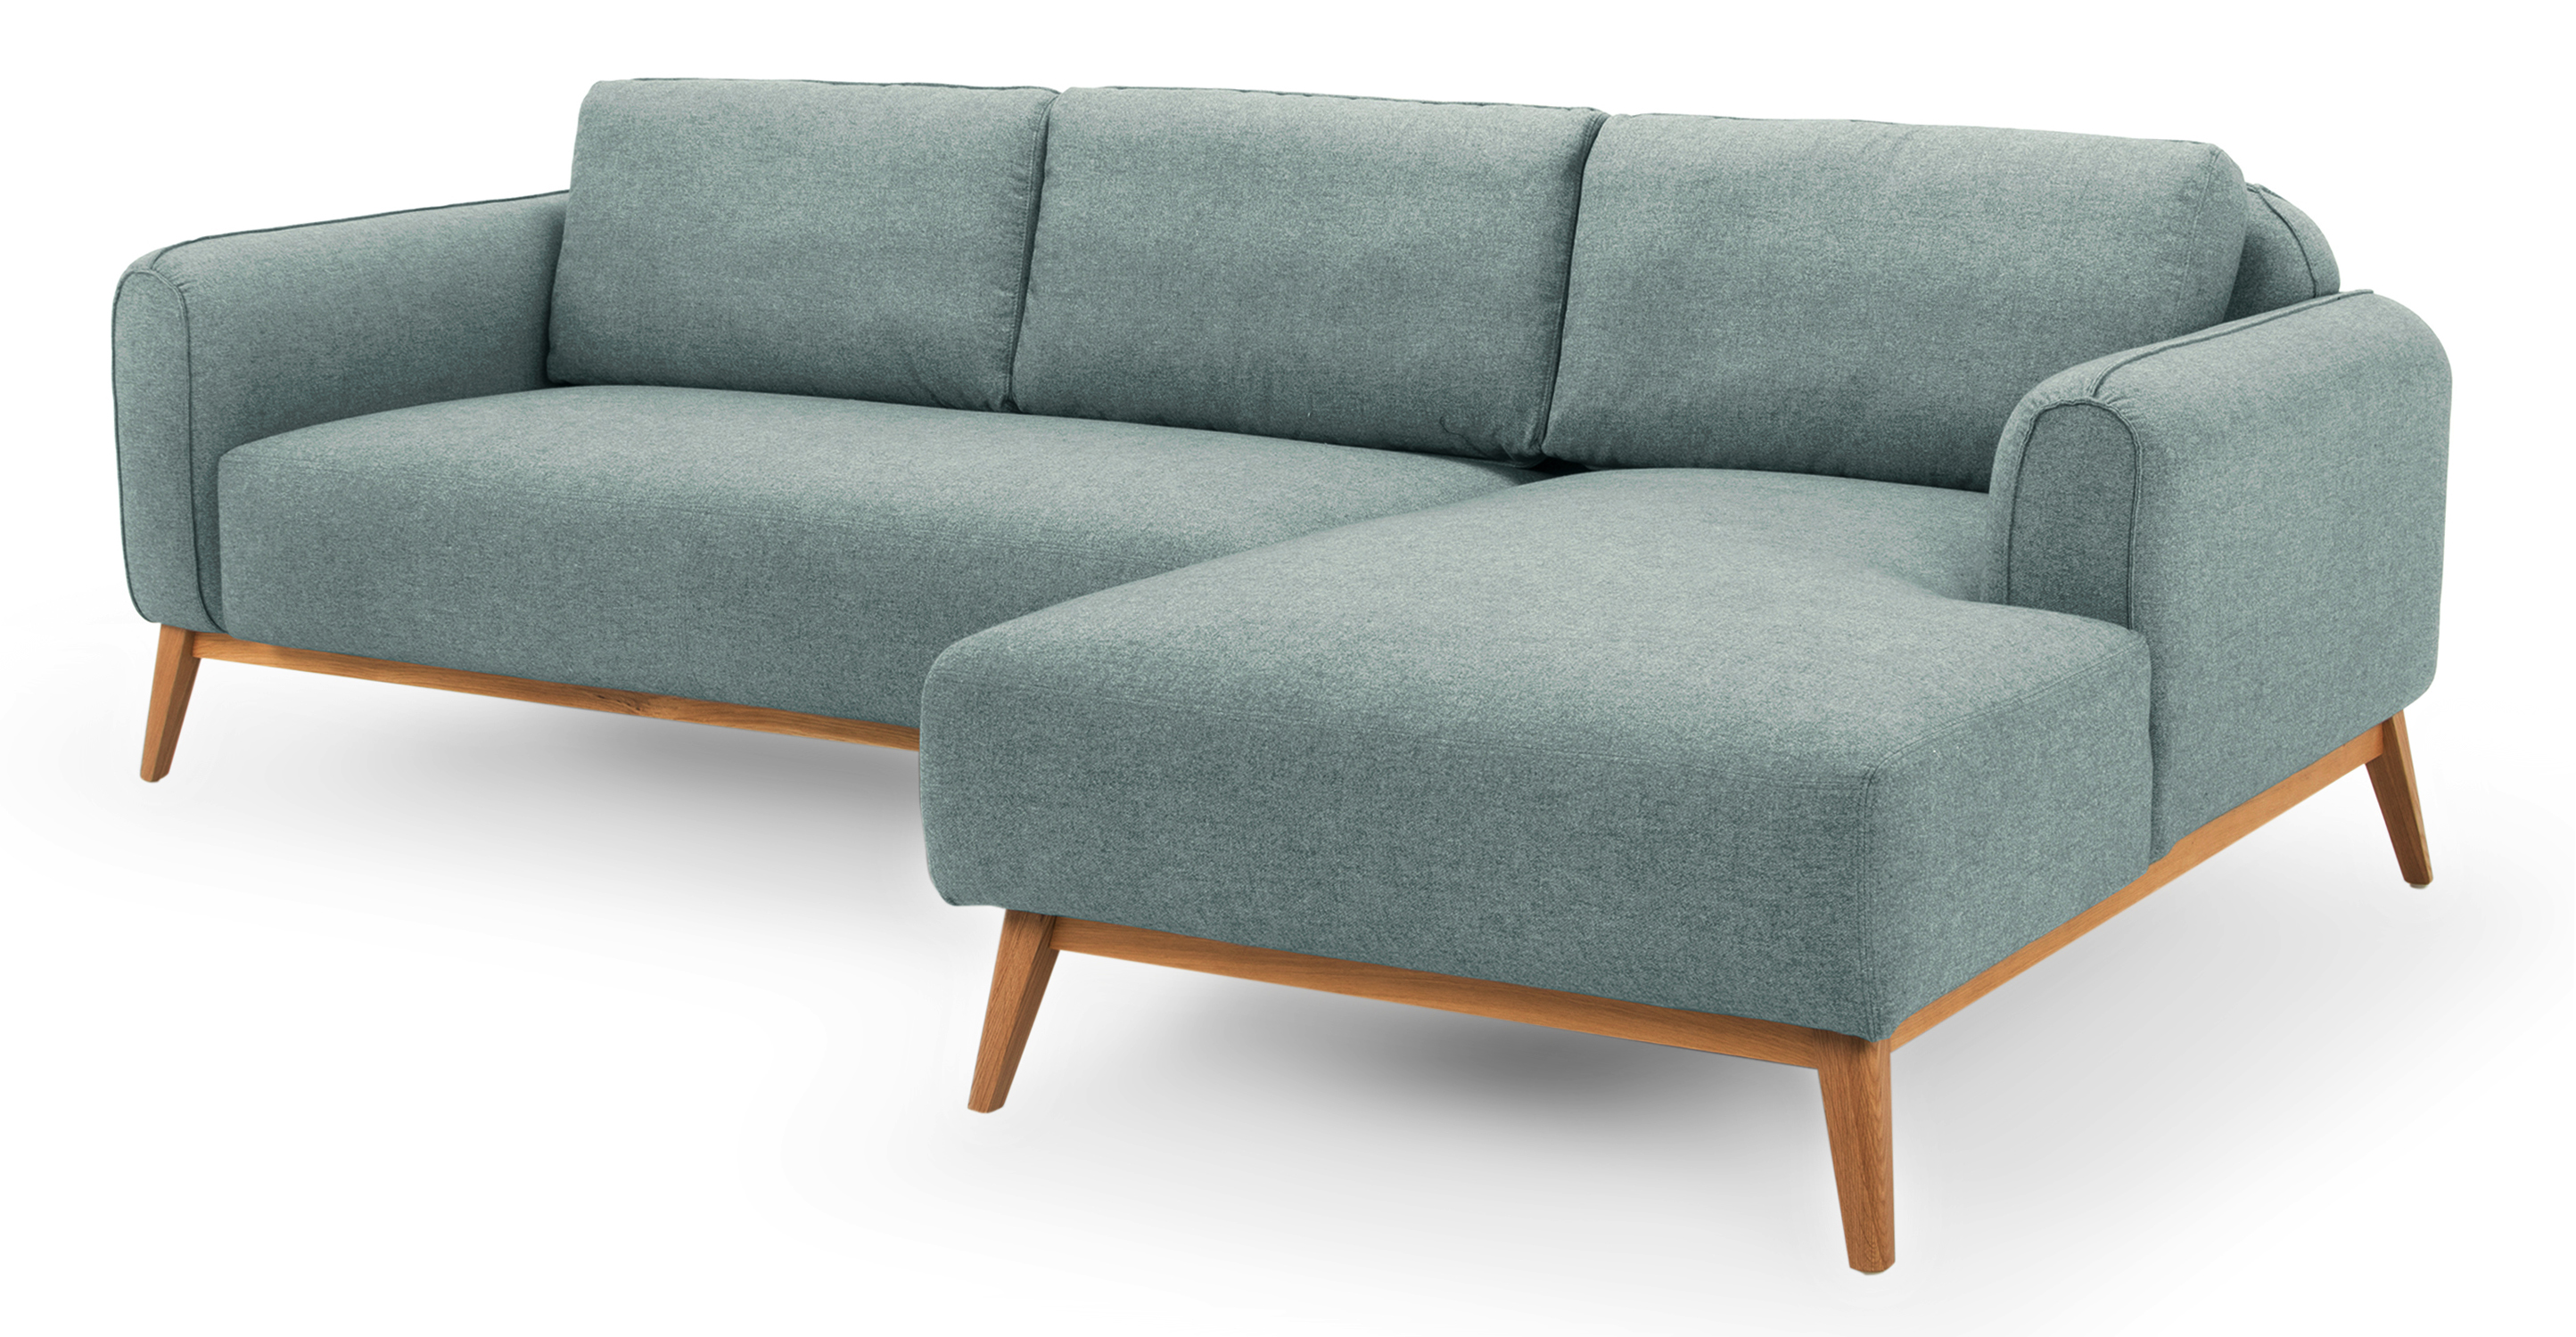 Pigeon Metro 4 sectional have full stuffed sofa appearance cushion. The arms, back, and seat cushions are affixed and 100% upholstery. Feel is modern and fun. The frame is exposed wood with slanted legs. 